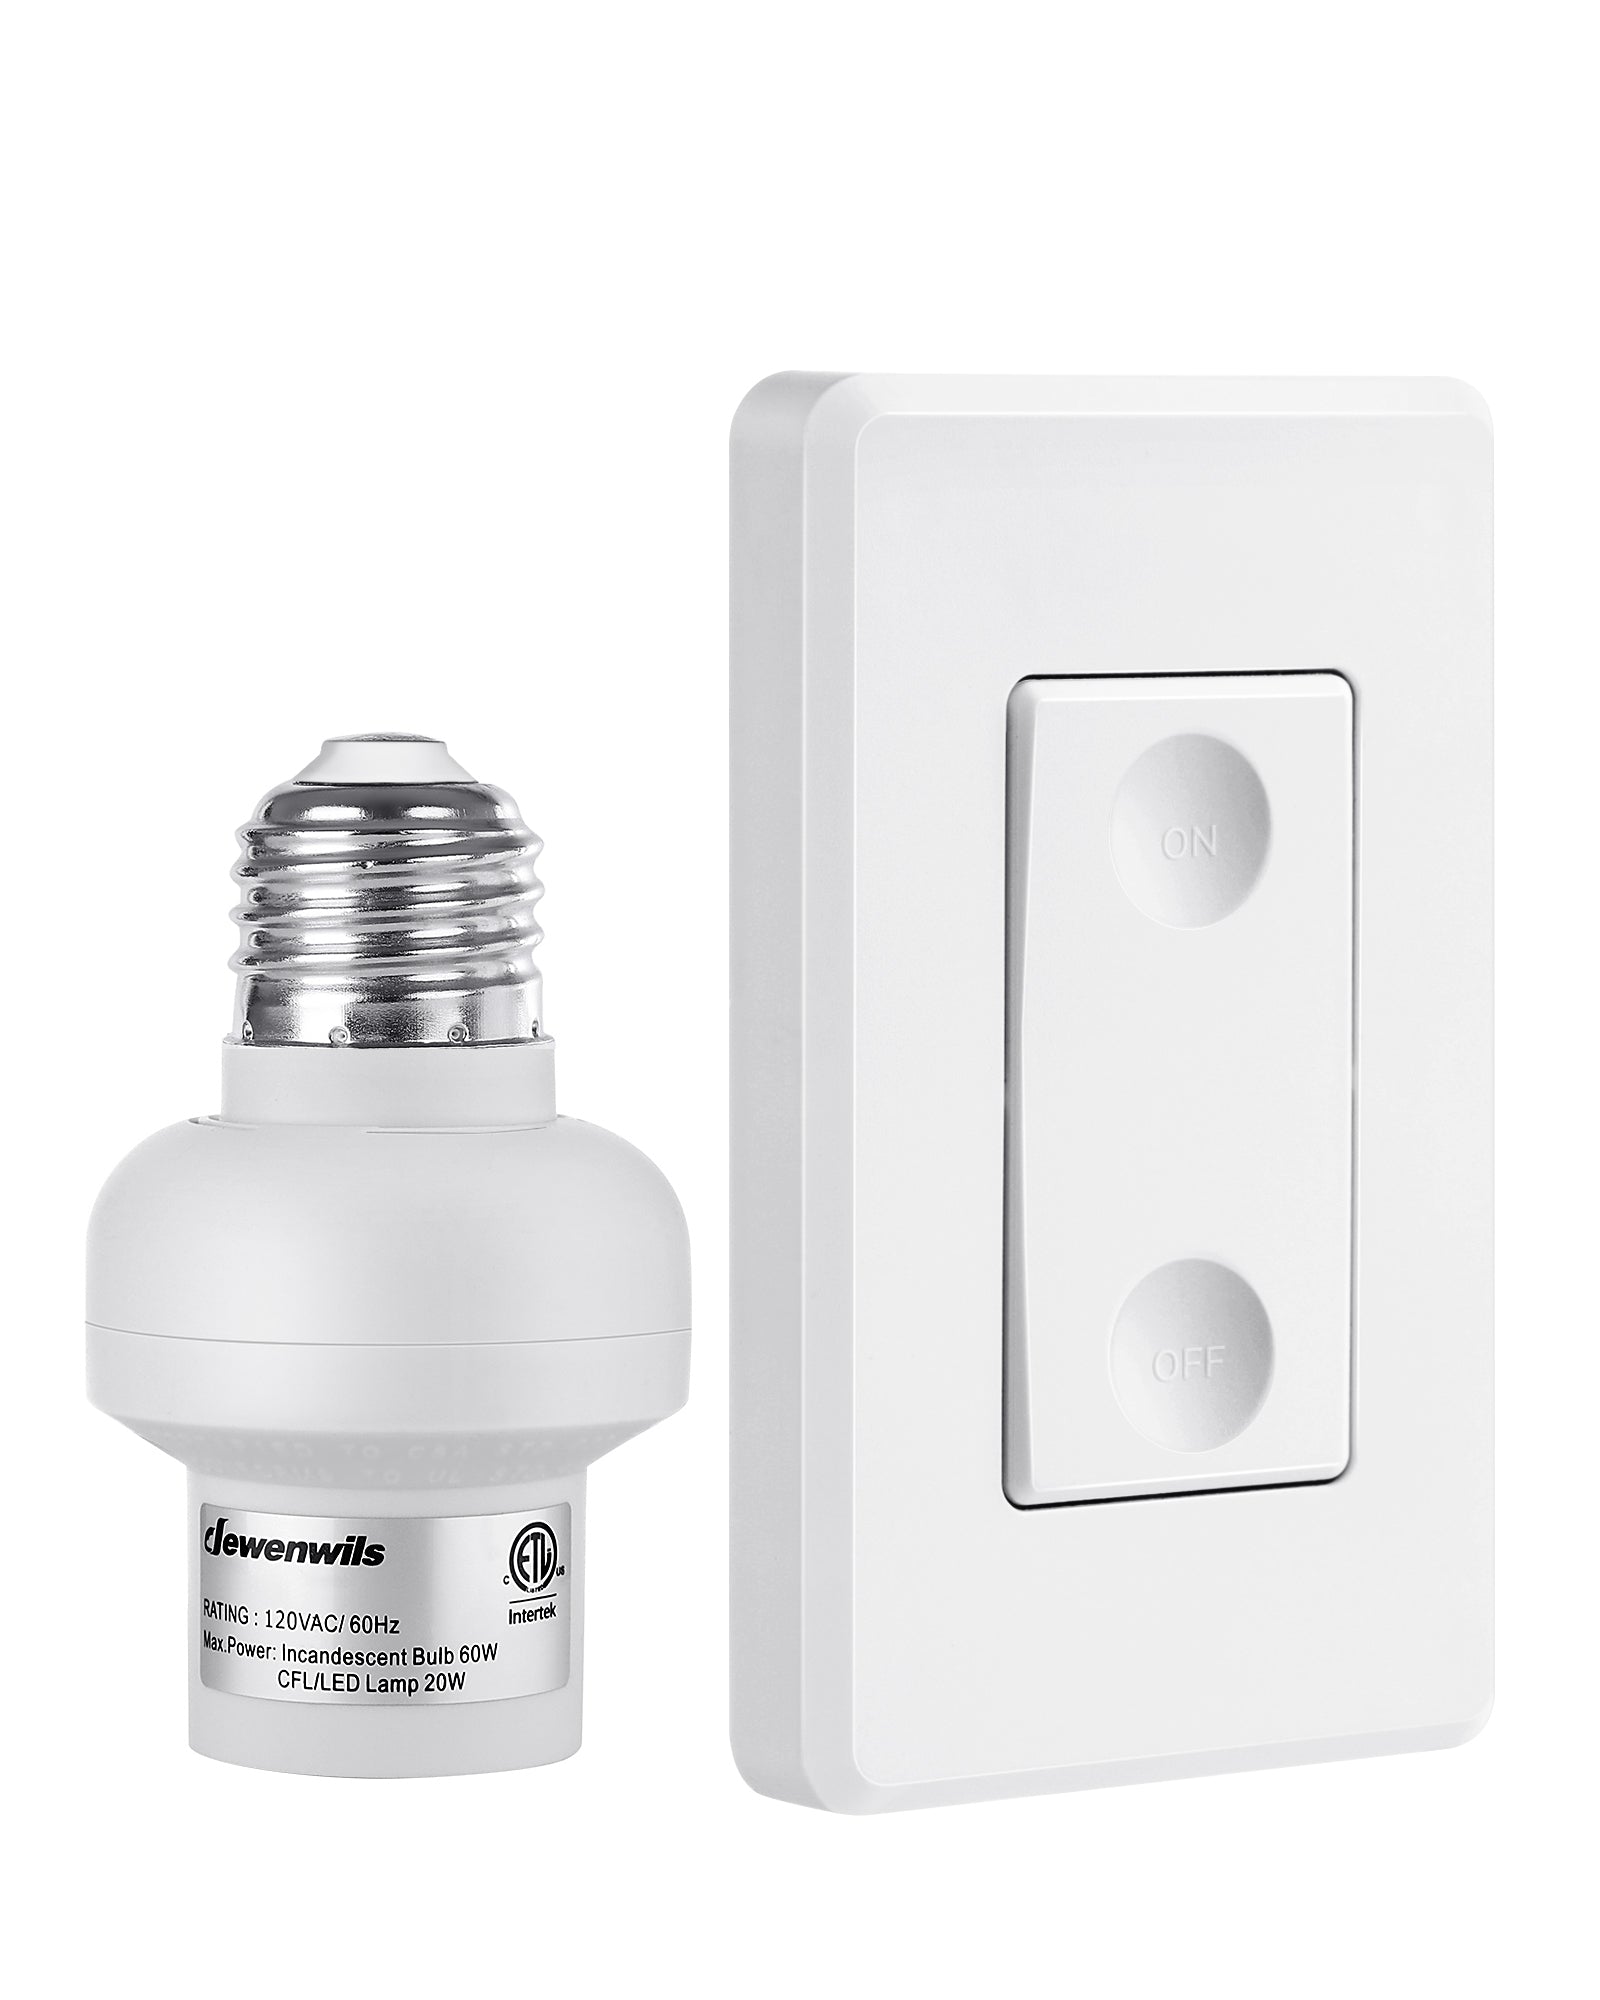 DEWENWILS Remote Control Light Bulb Socket, Wireless Light Switch, Remote  Light Socket E26 E27 Bulb Base with Wall Mounted Wireless Controller –  Dewenwils